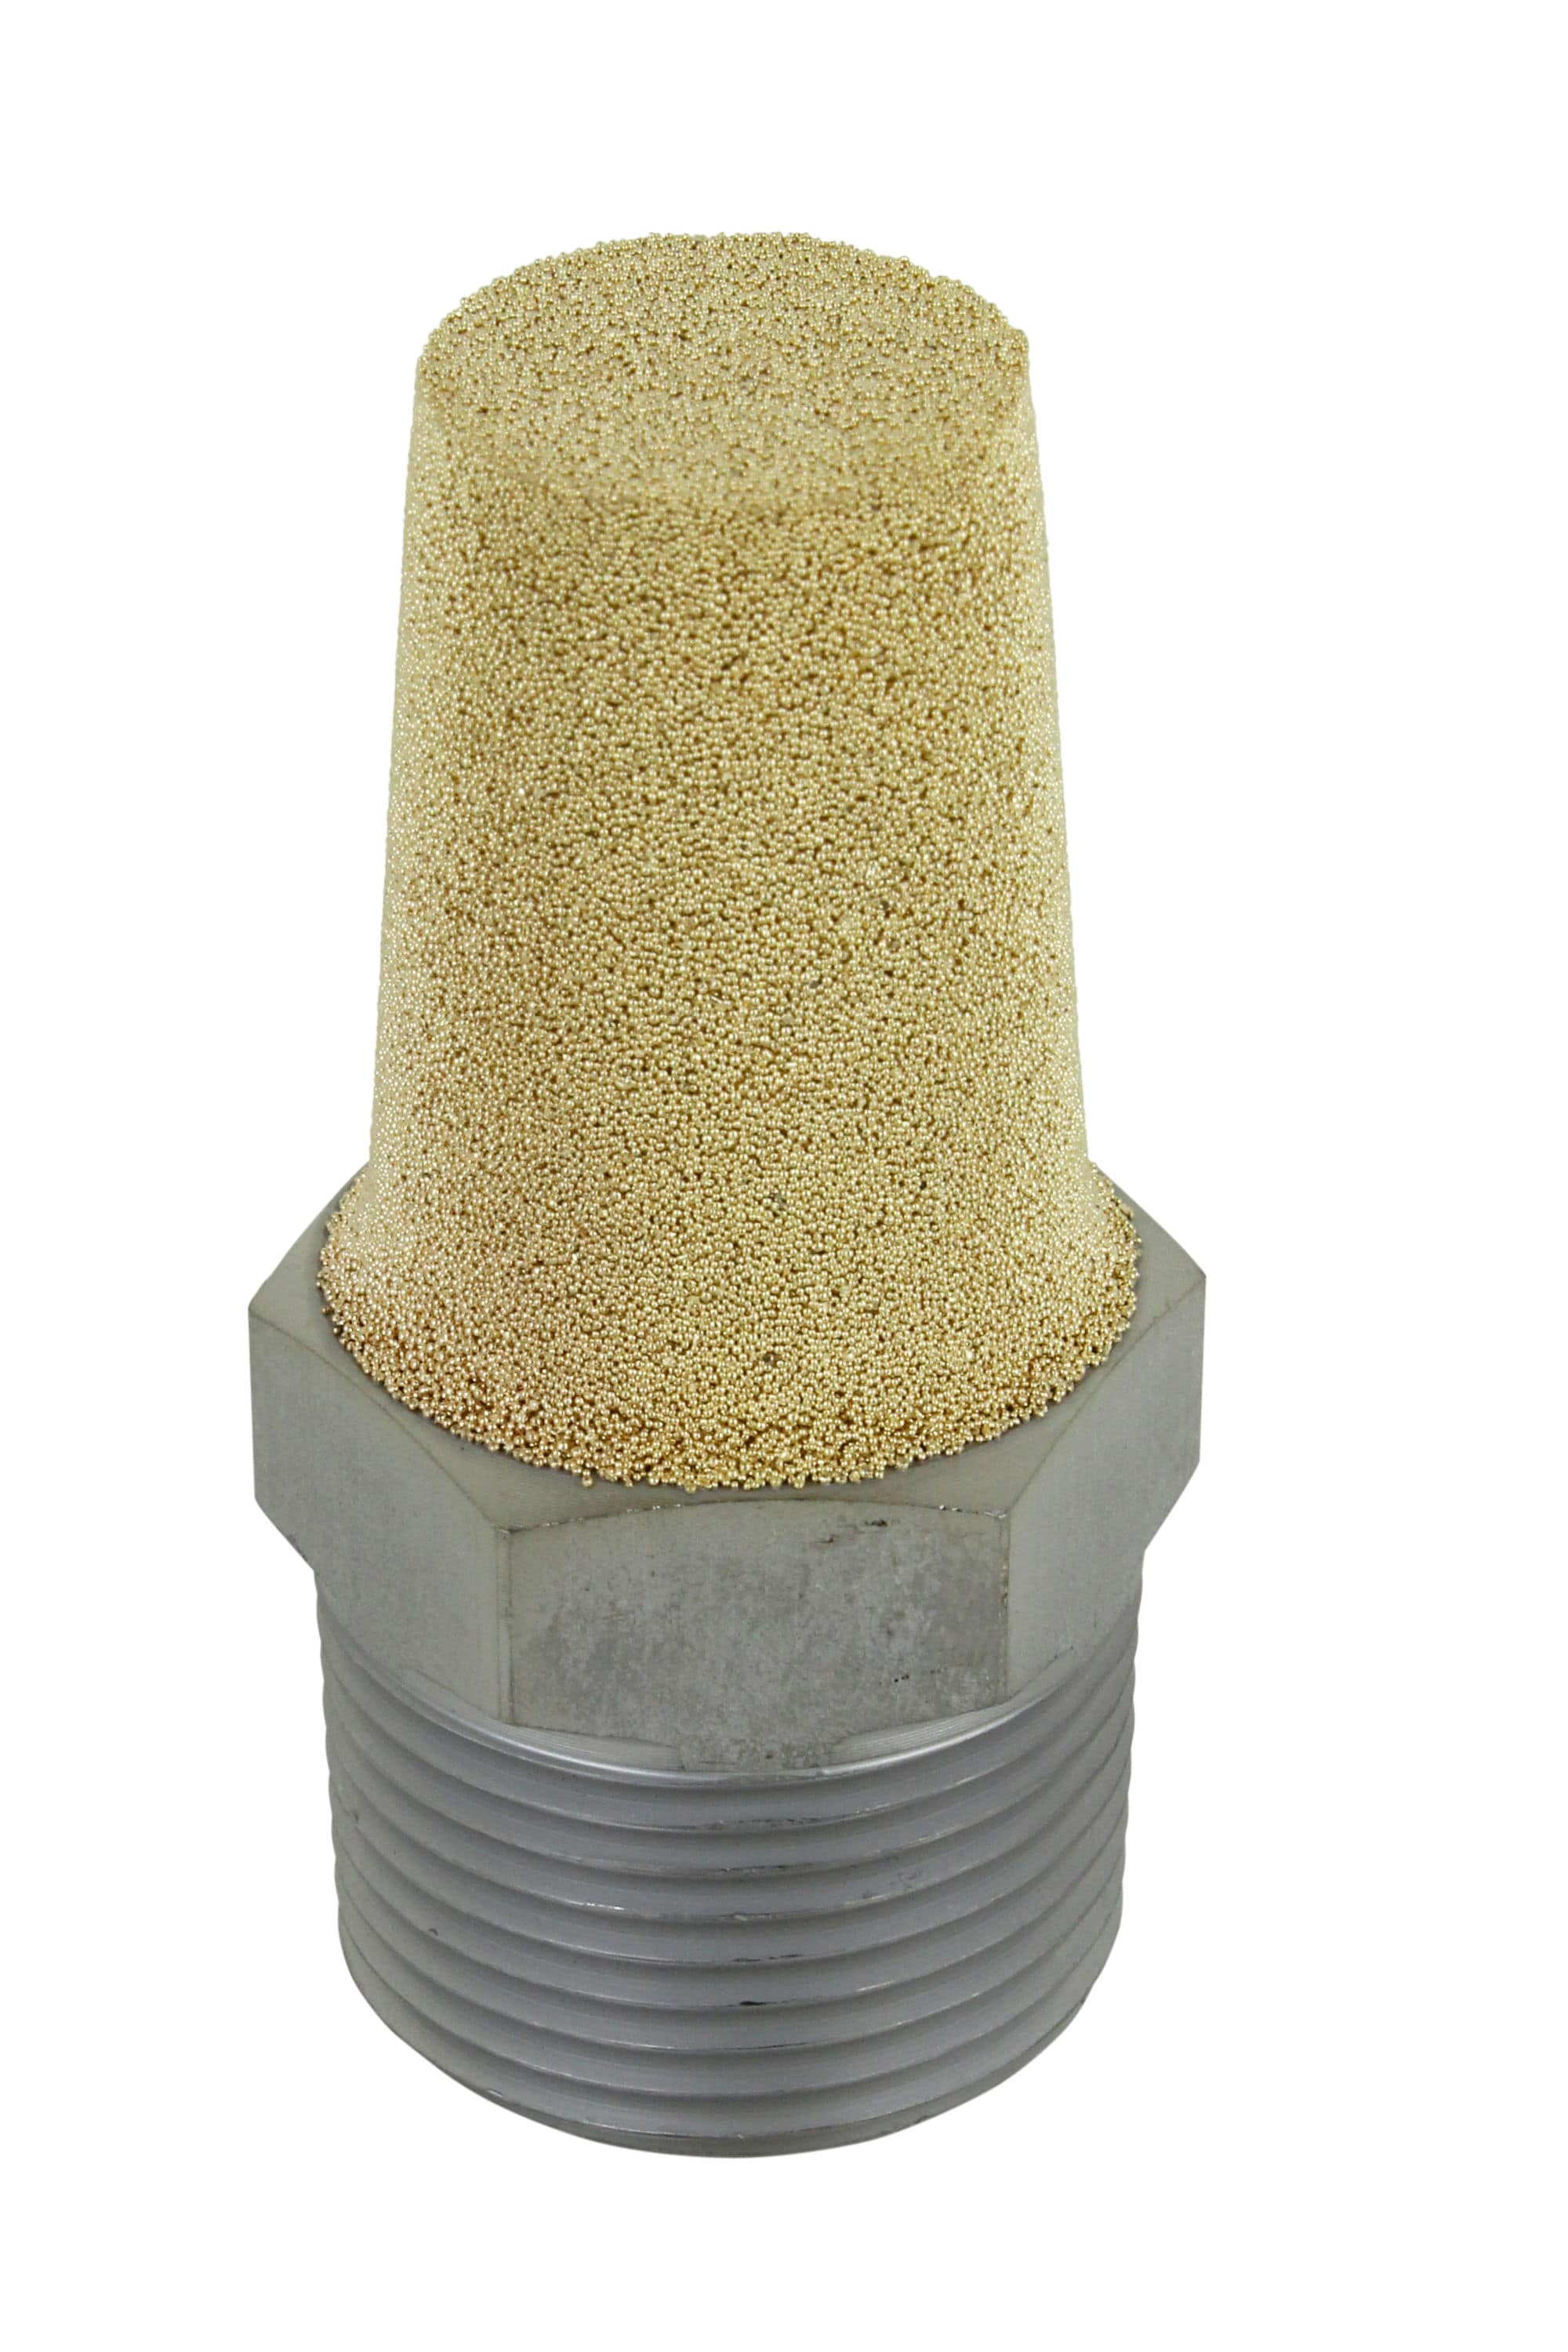 Silencer from Sintered Bronze with Six Sided Pneumatic Sound 